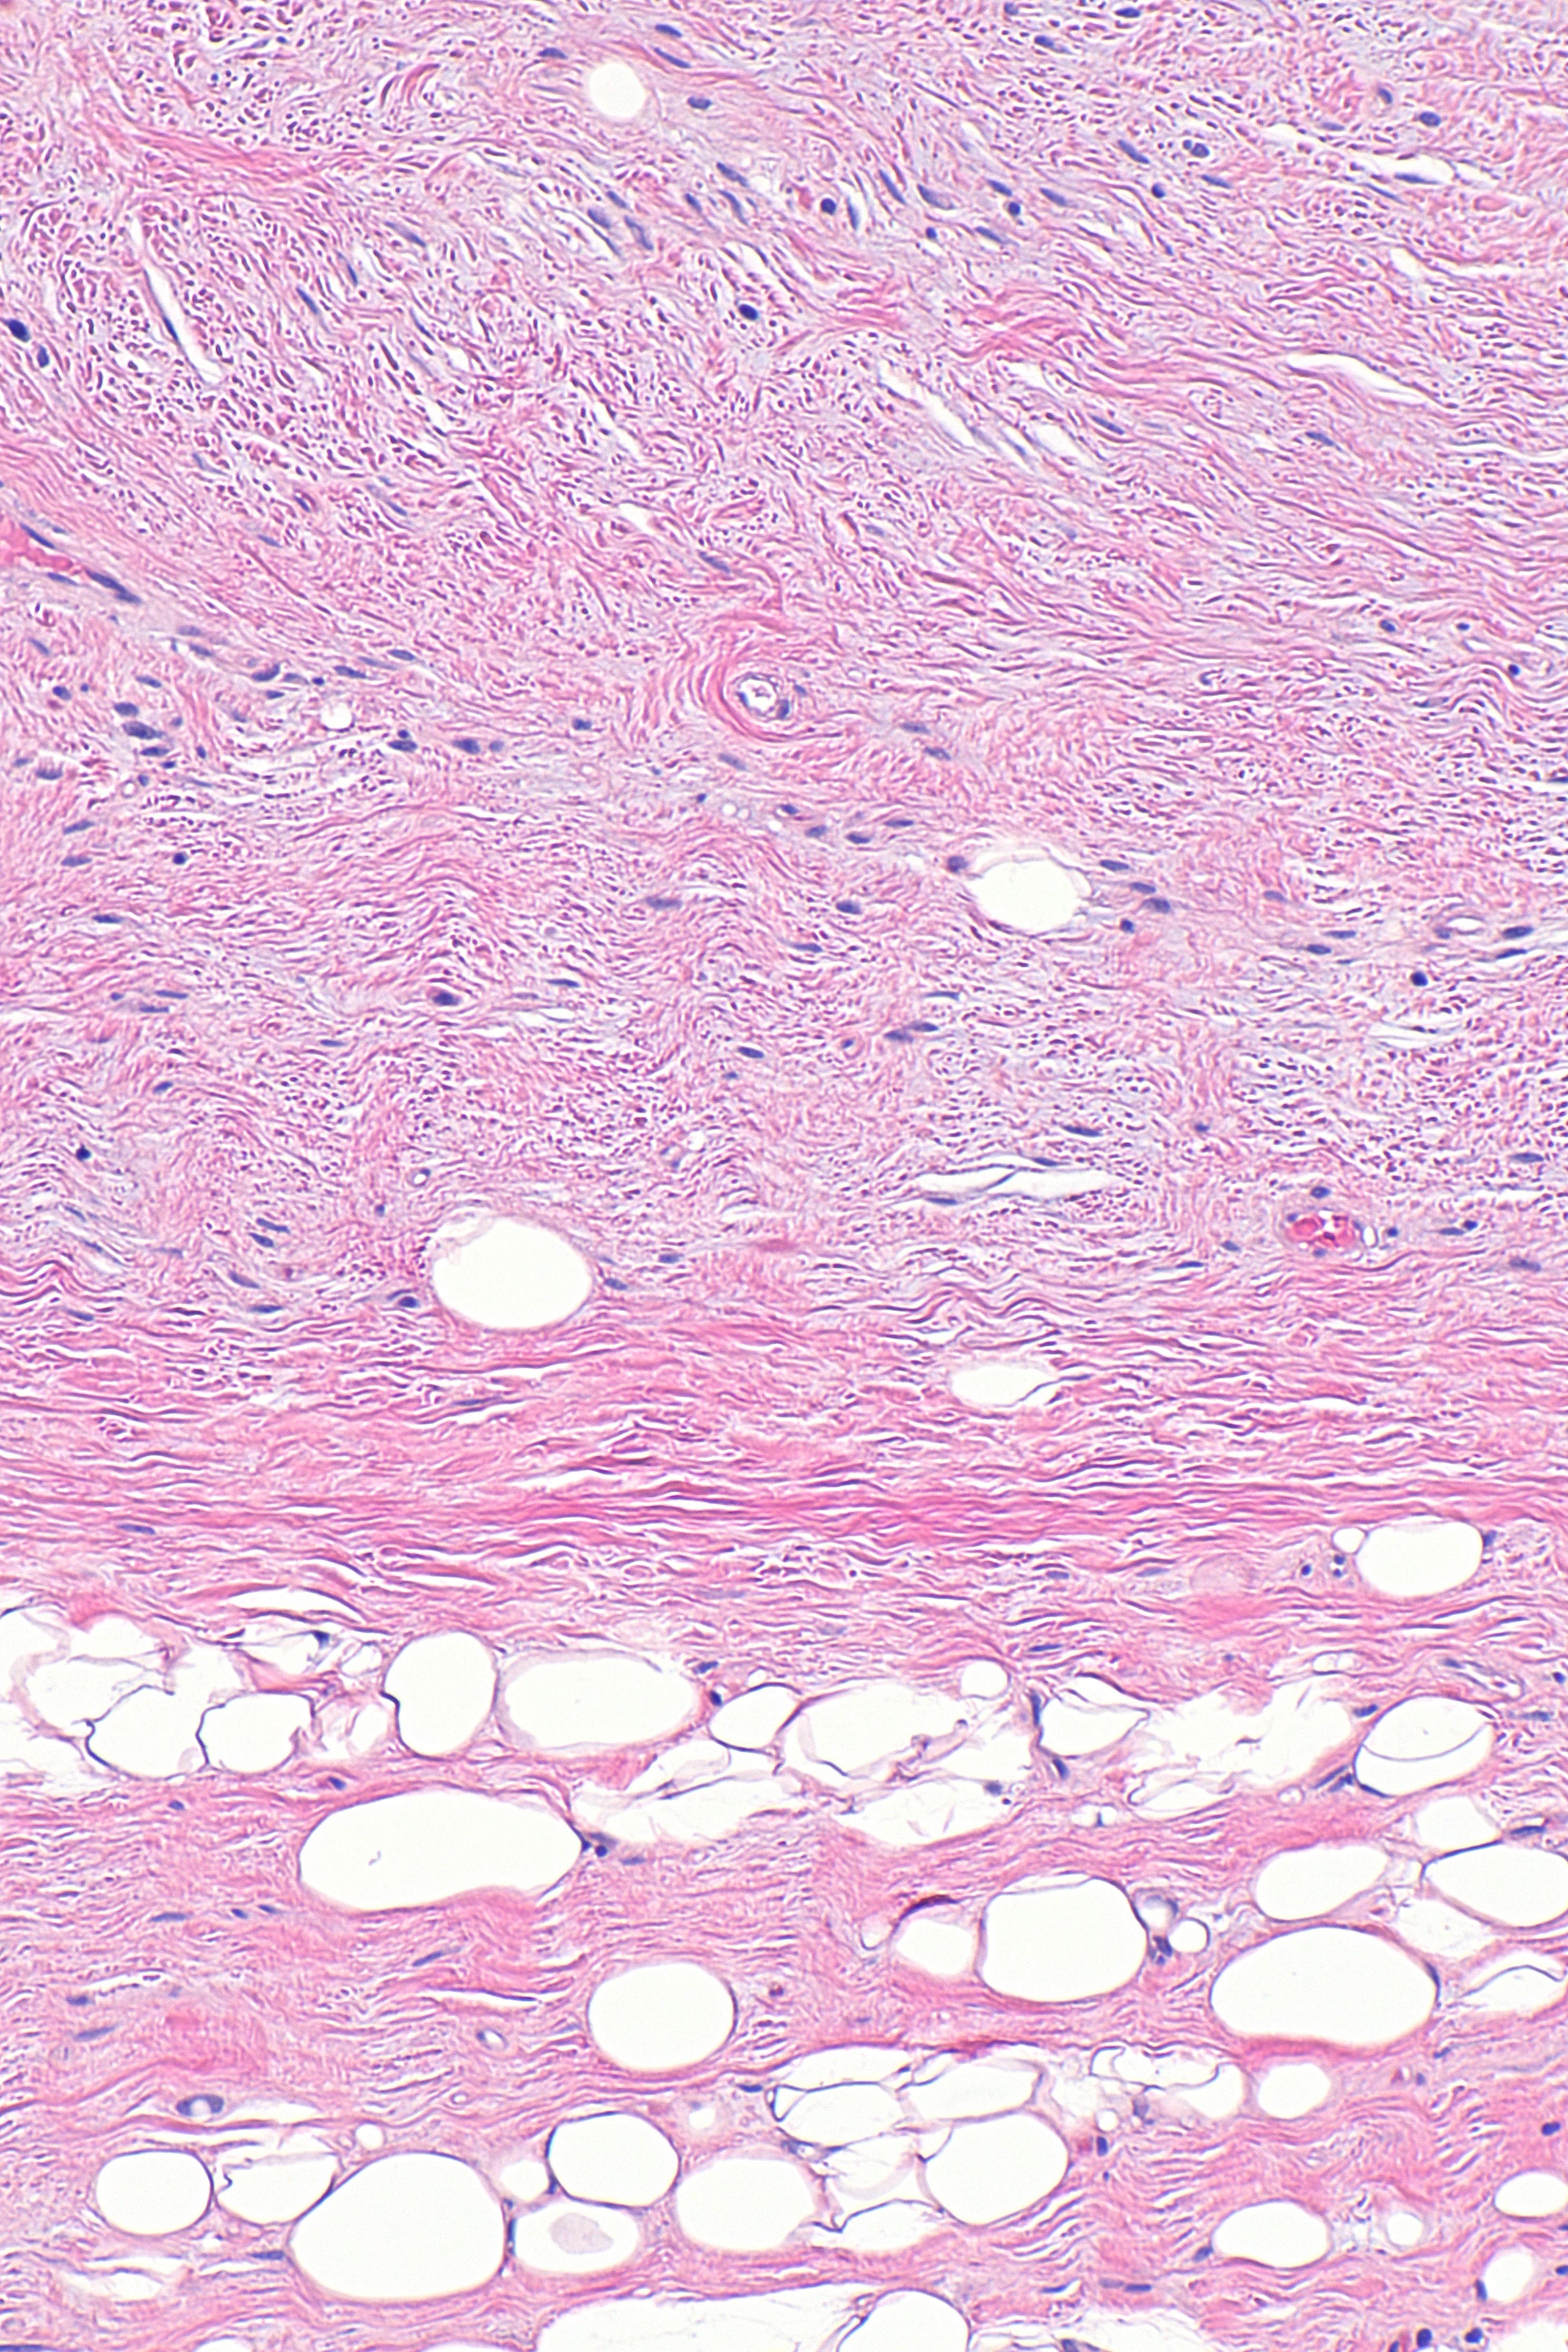 File:Spindle cell lipoma -- intermed mag.jpg